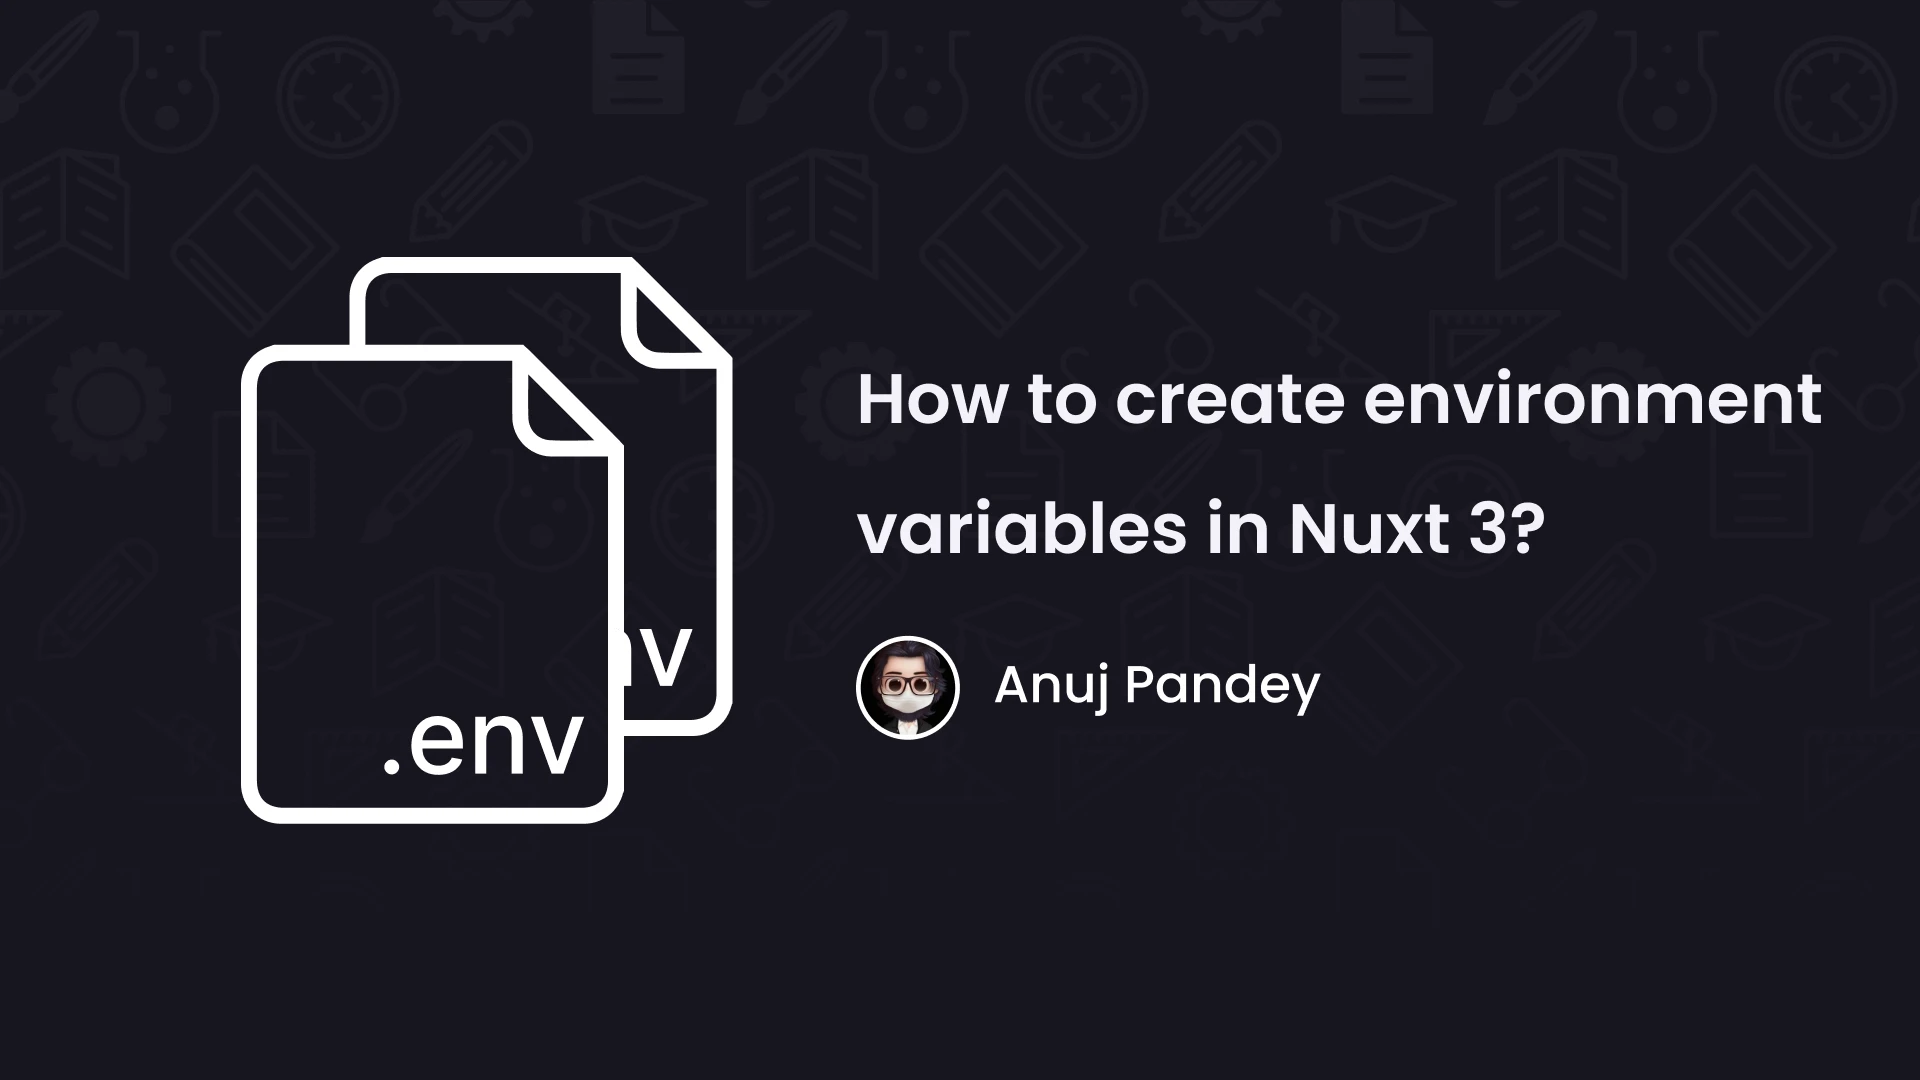 How to access environment variables in Nuxt 3?